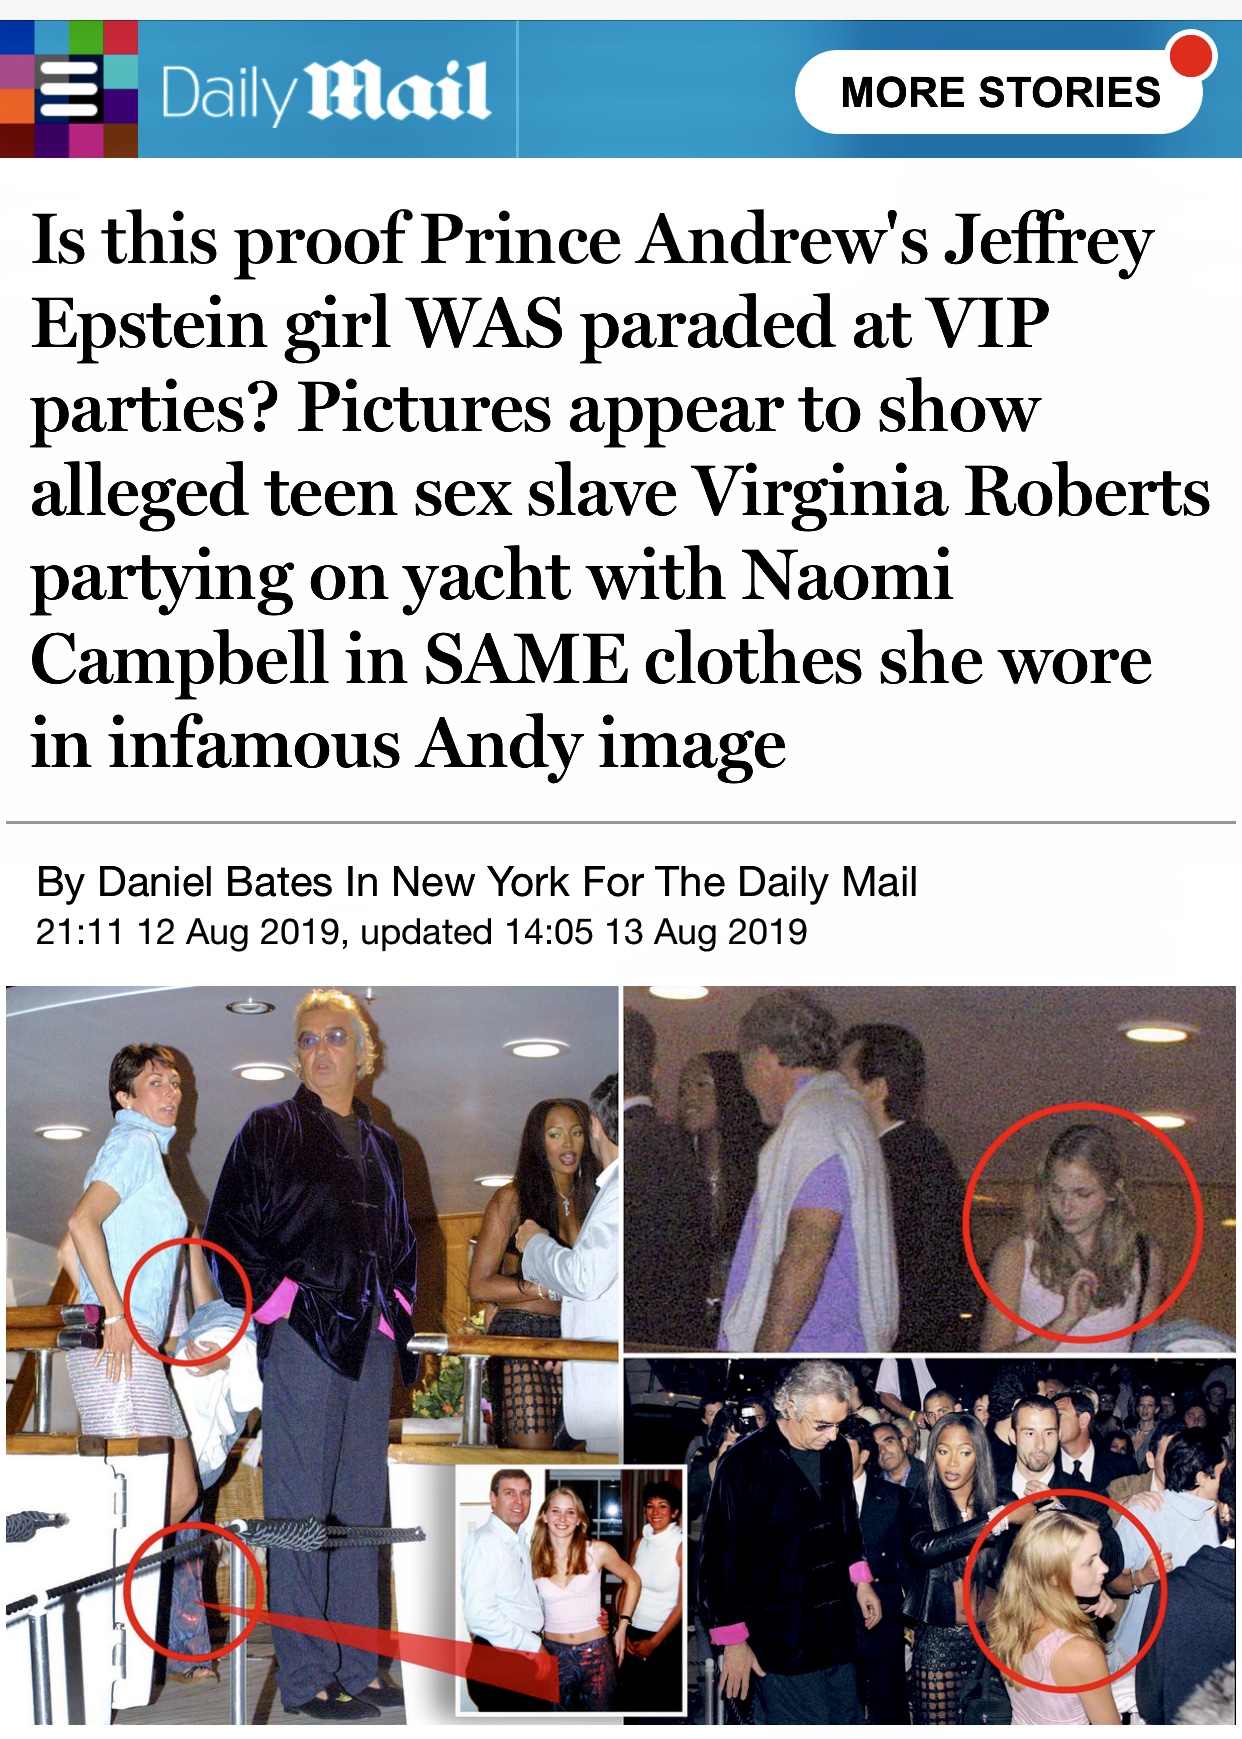 Jeffrey Epstein: Proof Prince Andrew’s girl was paraded at VIP parties?